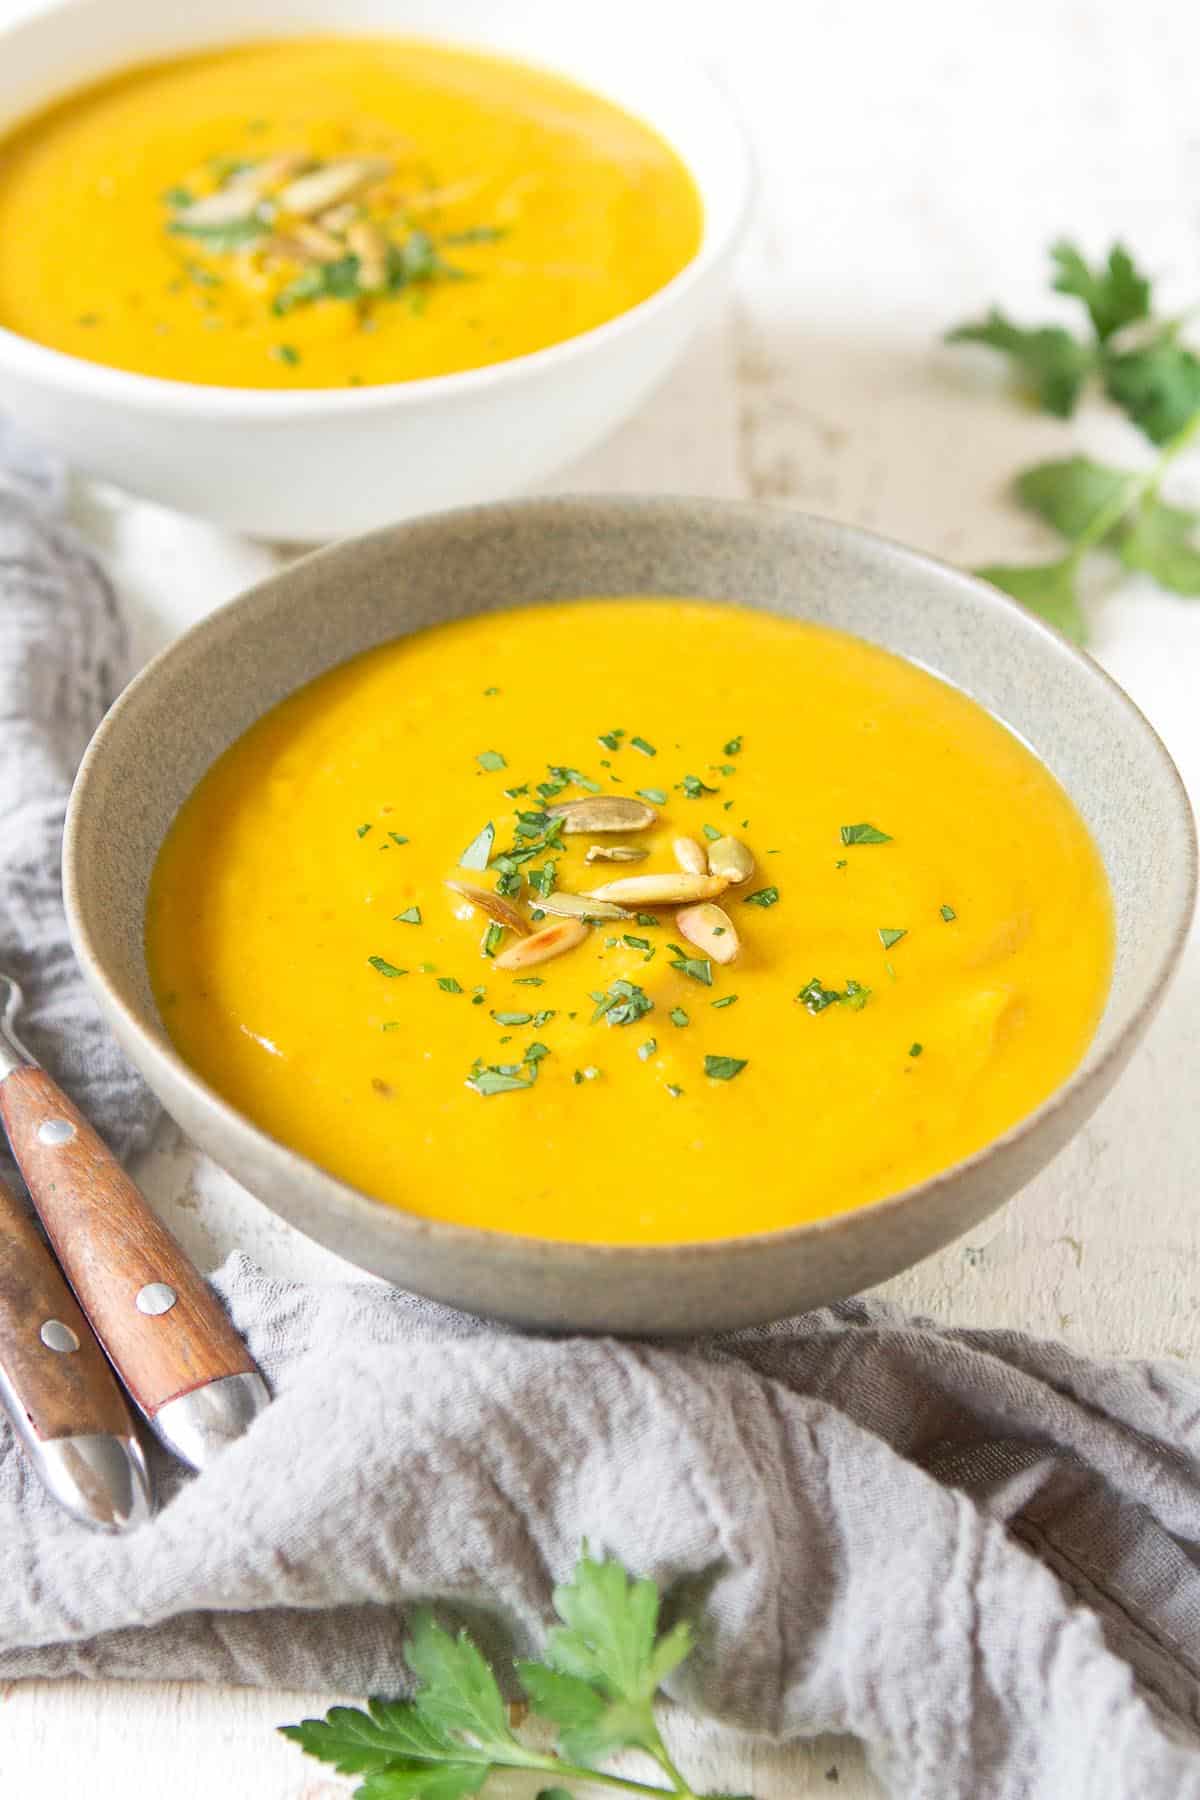 Light gray and white bowls filled with healthy cauliflower soup. Spoons on the side.